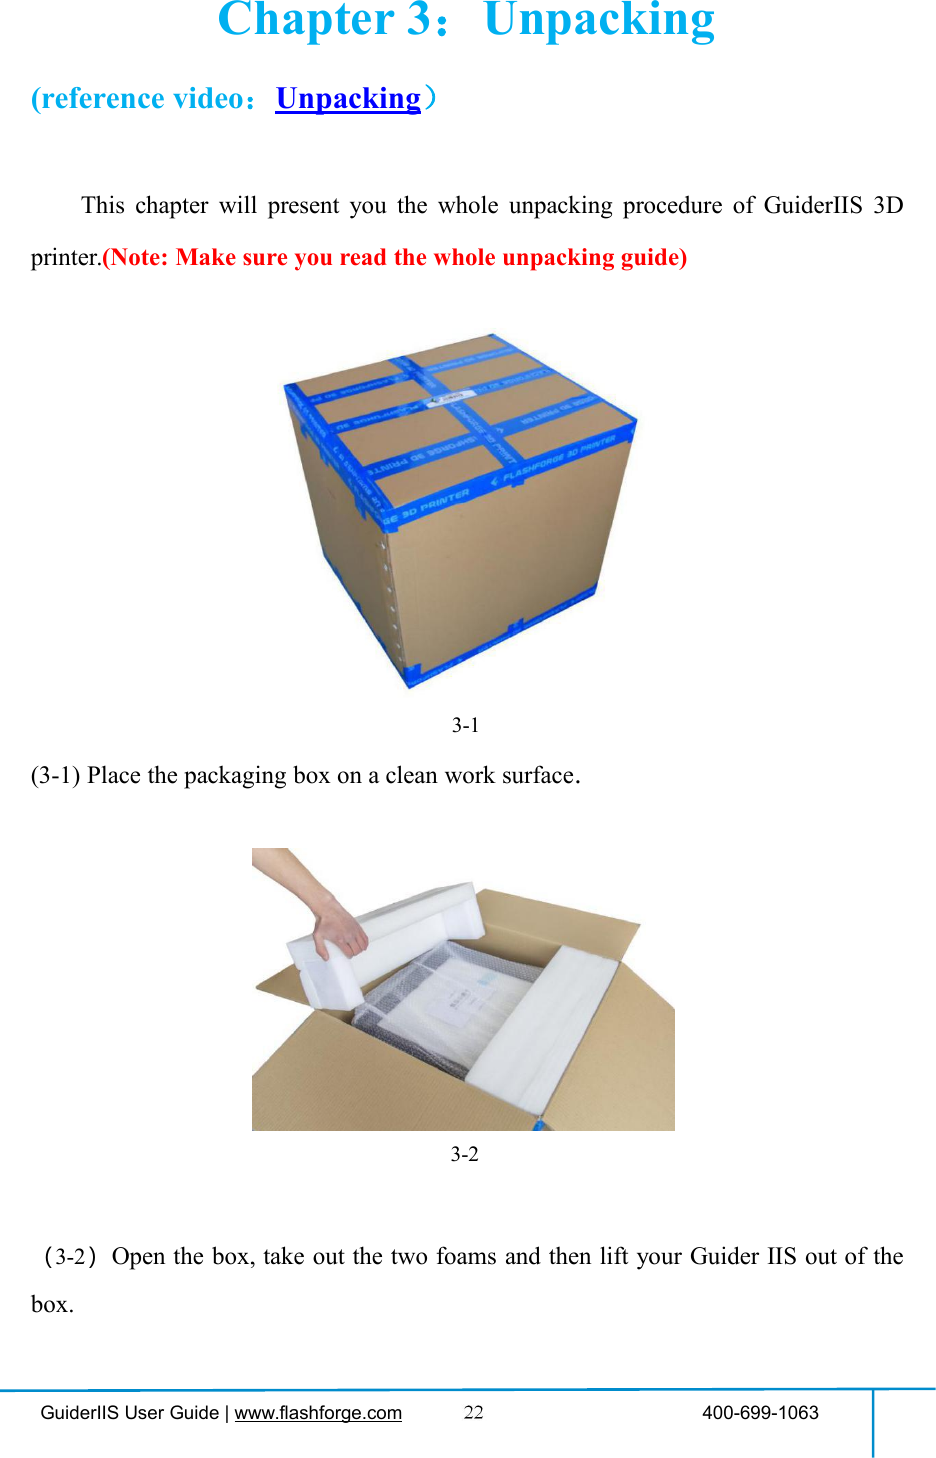 GuiderIIS User Guide | www.flashforge.com 400-699-1063Chapter 3：Unpacking(reference video：Unpacking）This chapter will present you the whole unpacking procedure of GuiderIIS 3Dprinter.(Note: Make sure you read the whole unpacking guide)3-1(3-1) Place the packaging box on a clean work surface.（3-2）Open the box, take out the two foams and then lift your Guider ⅡS out of thebox.3-2